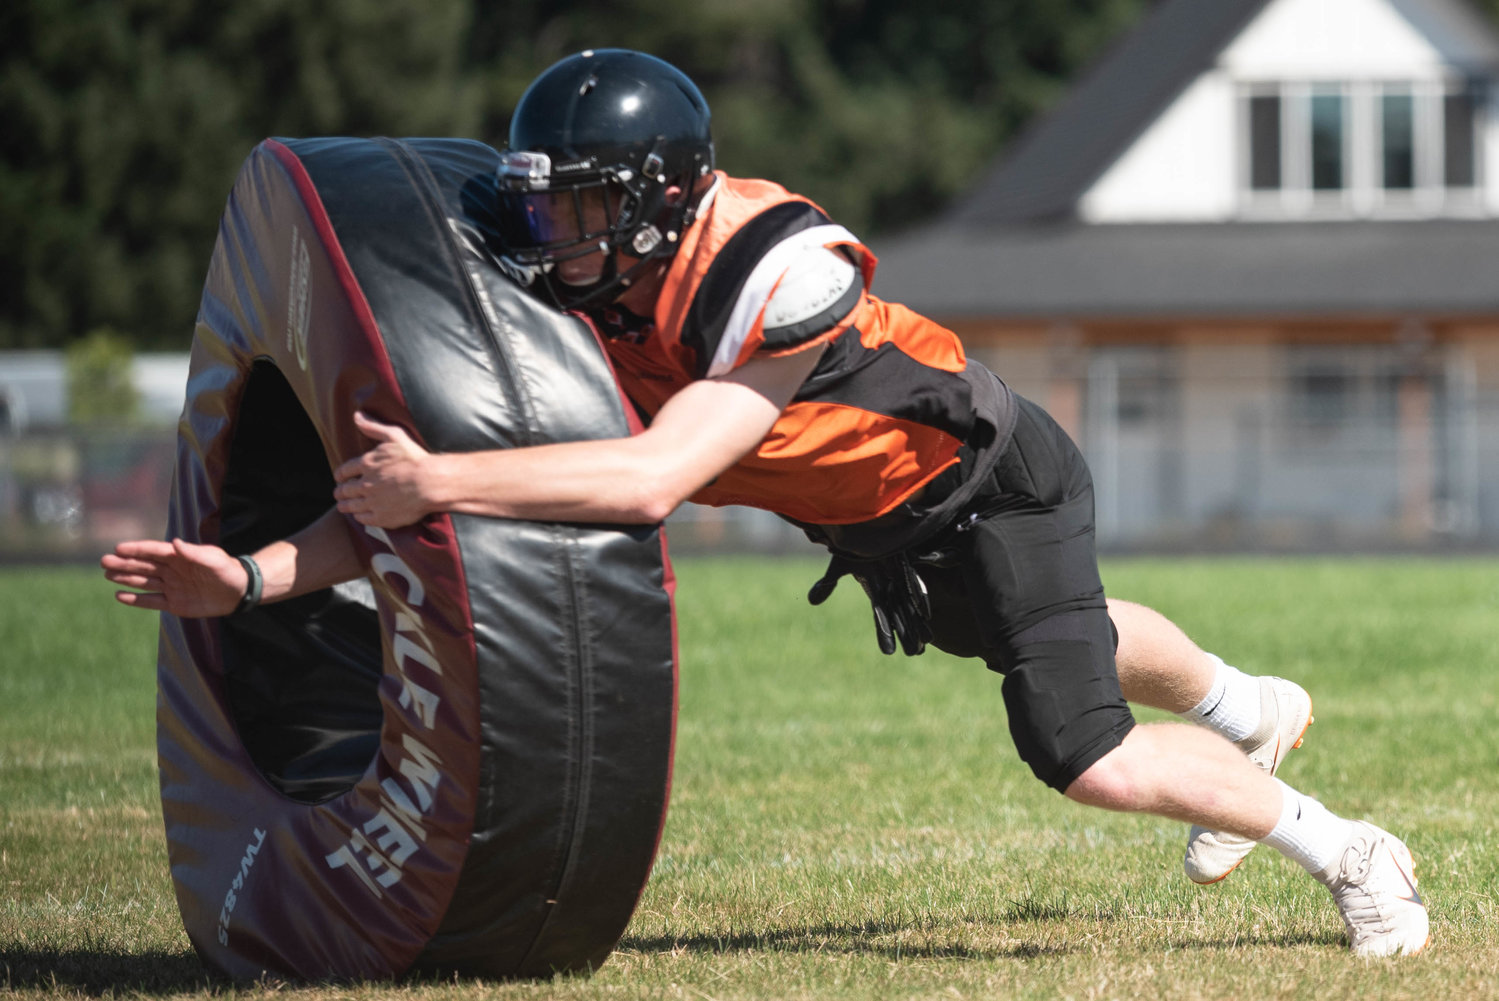 A Rainier player tackles a dummy during a drill Aug. 22.